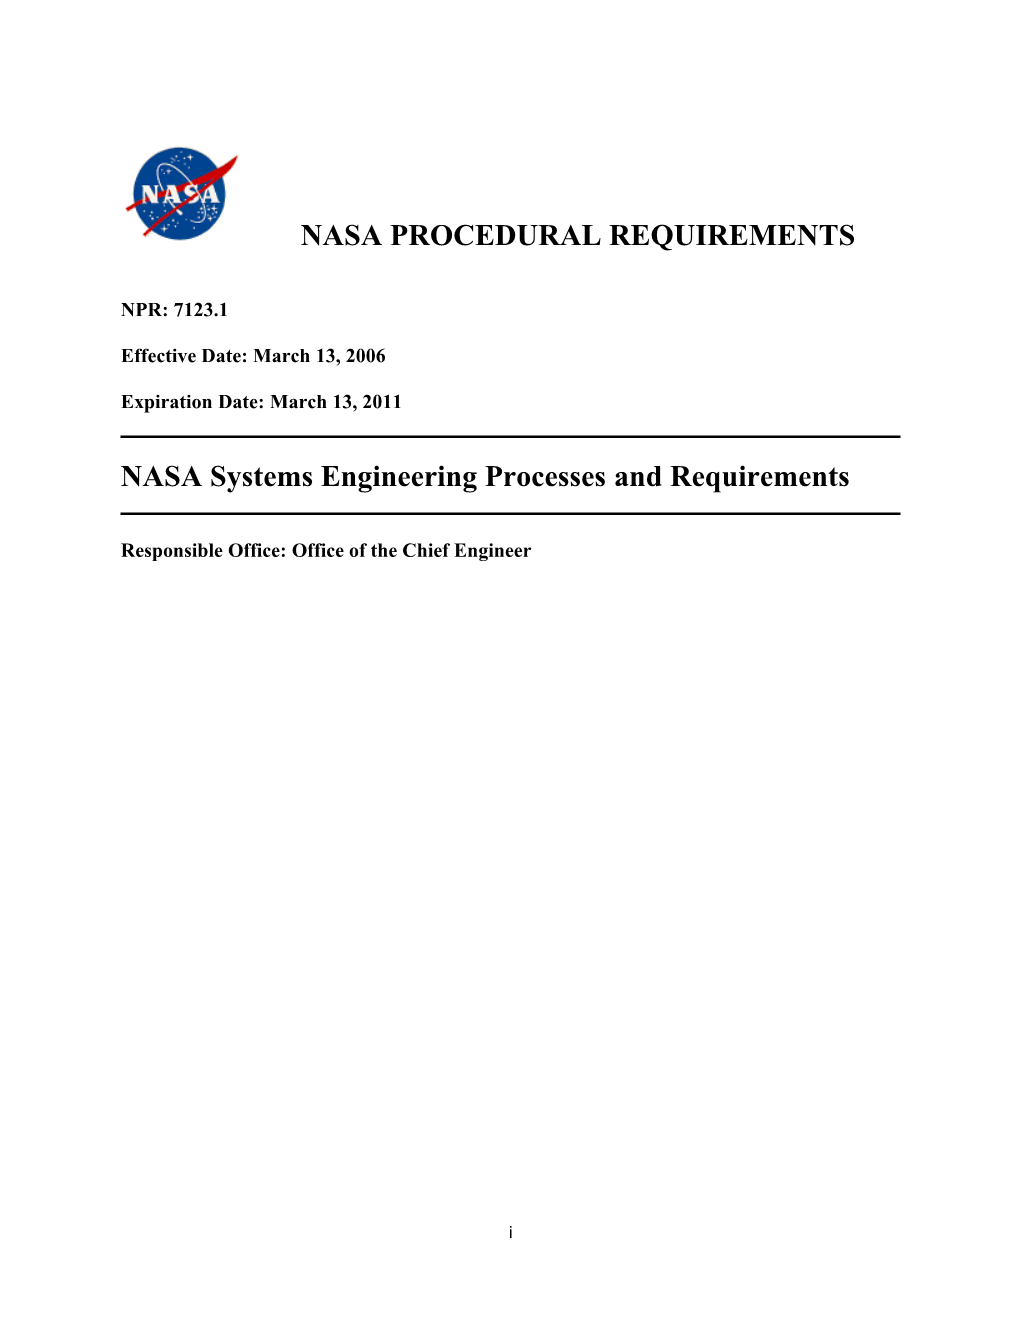 NASA Systems Engineering Processesand Requirements